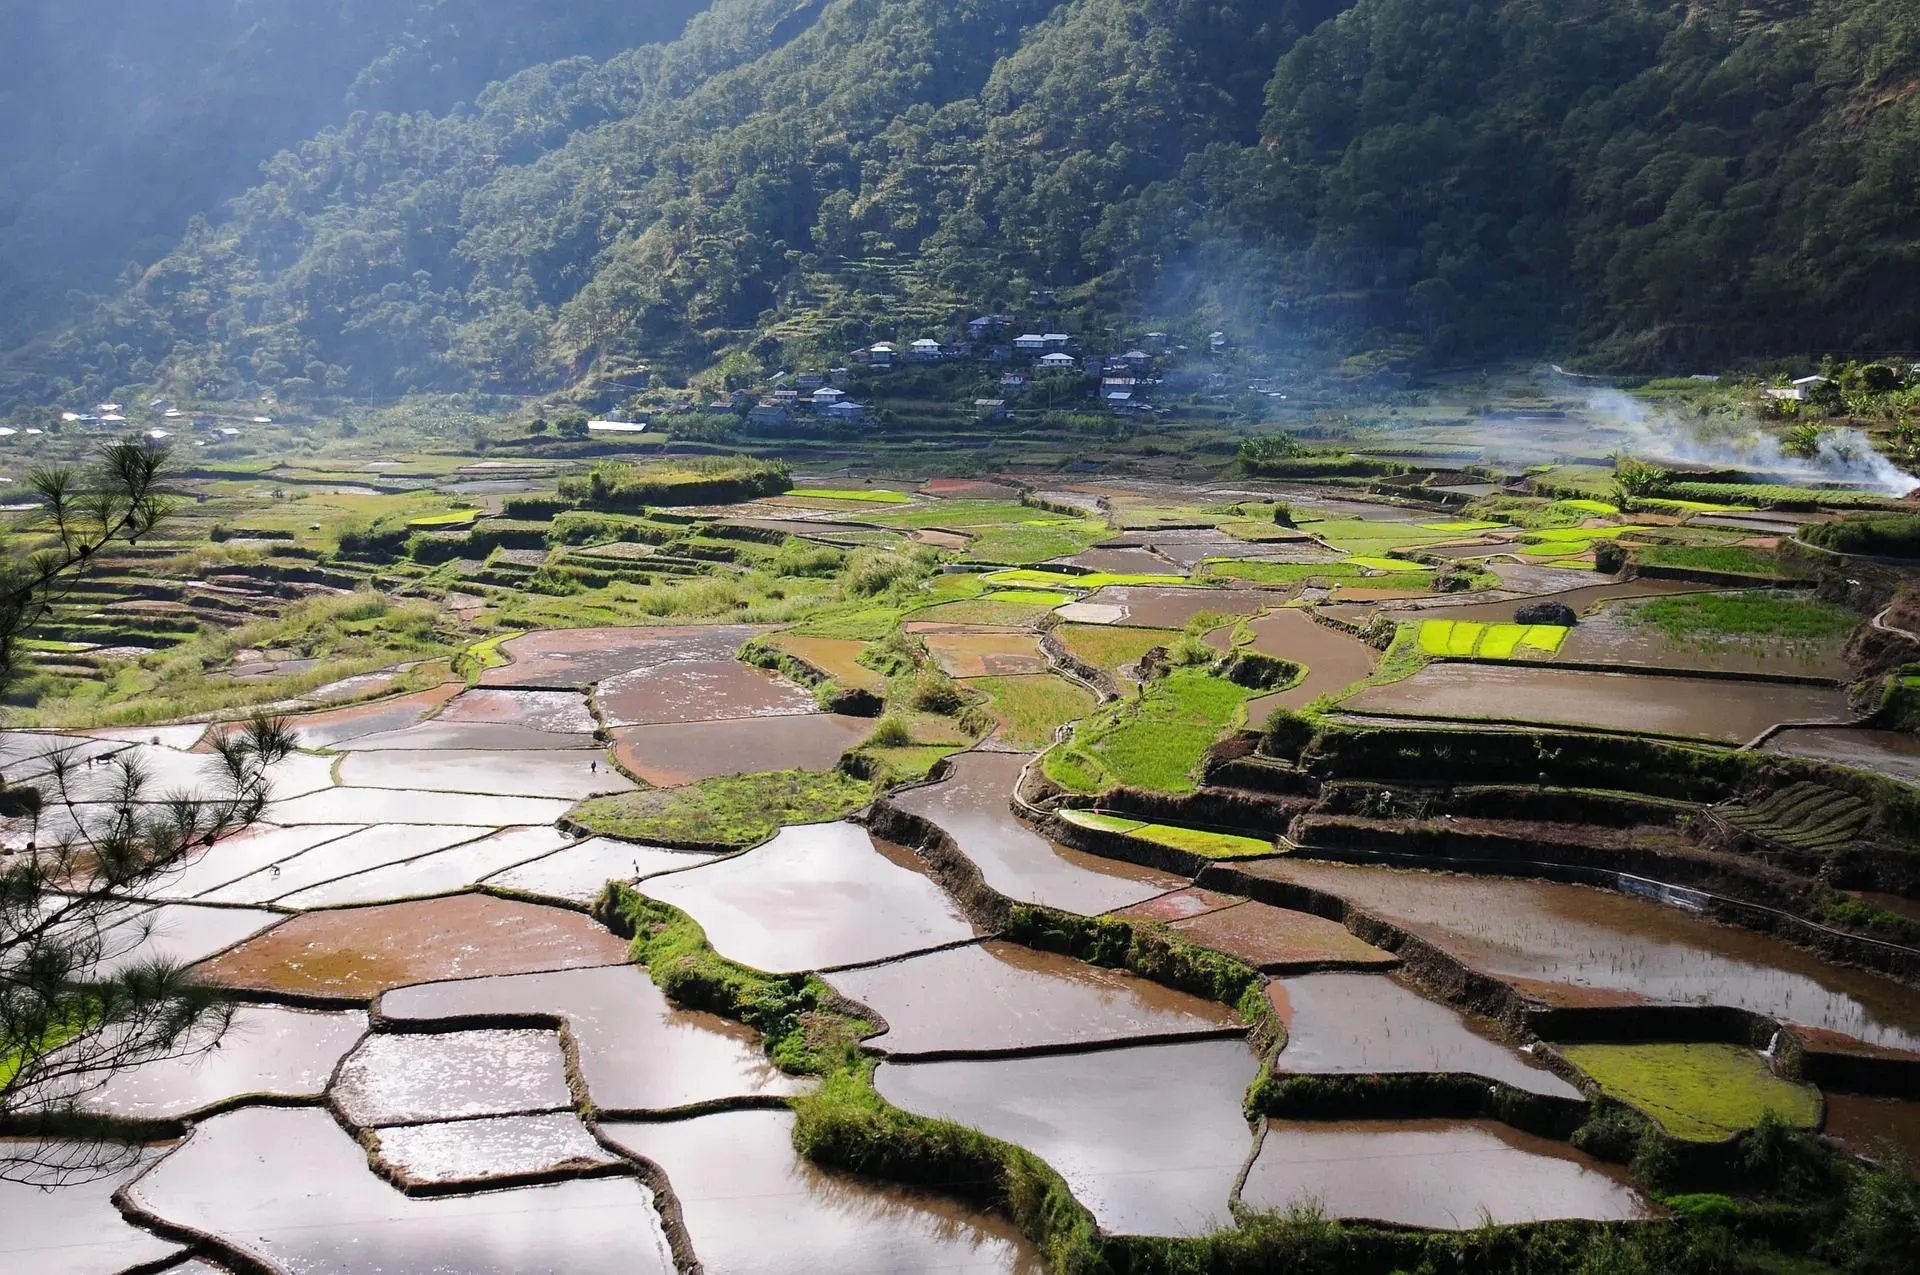 Once the rice grains develop, the water in which it grows must drain before harvesting.